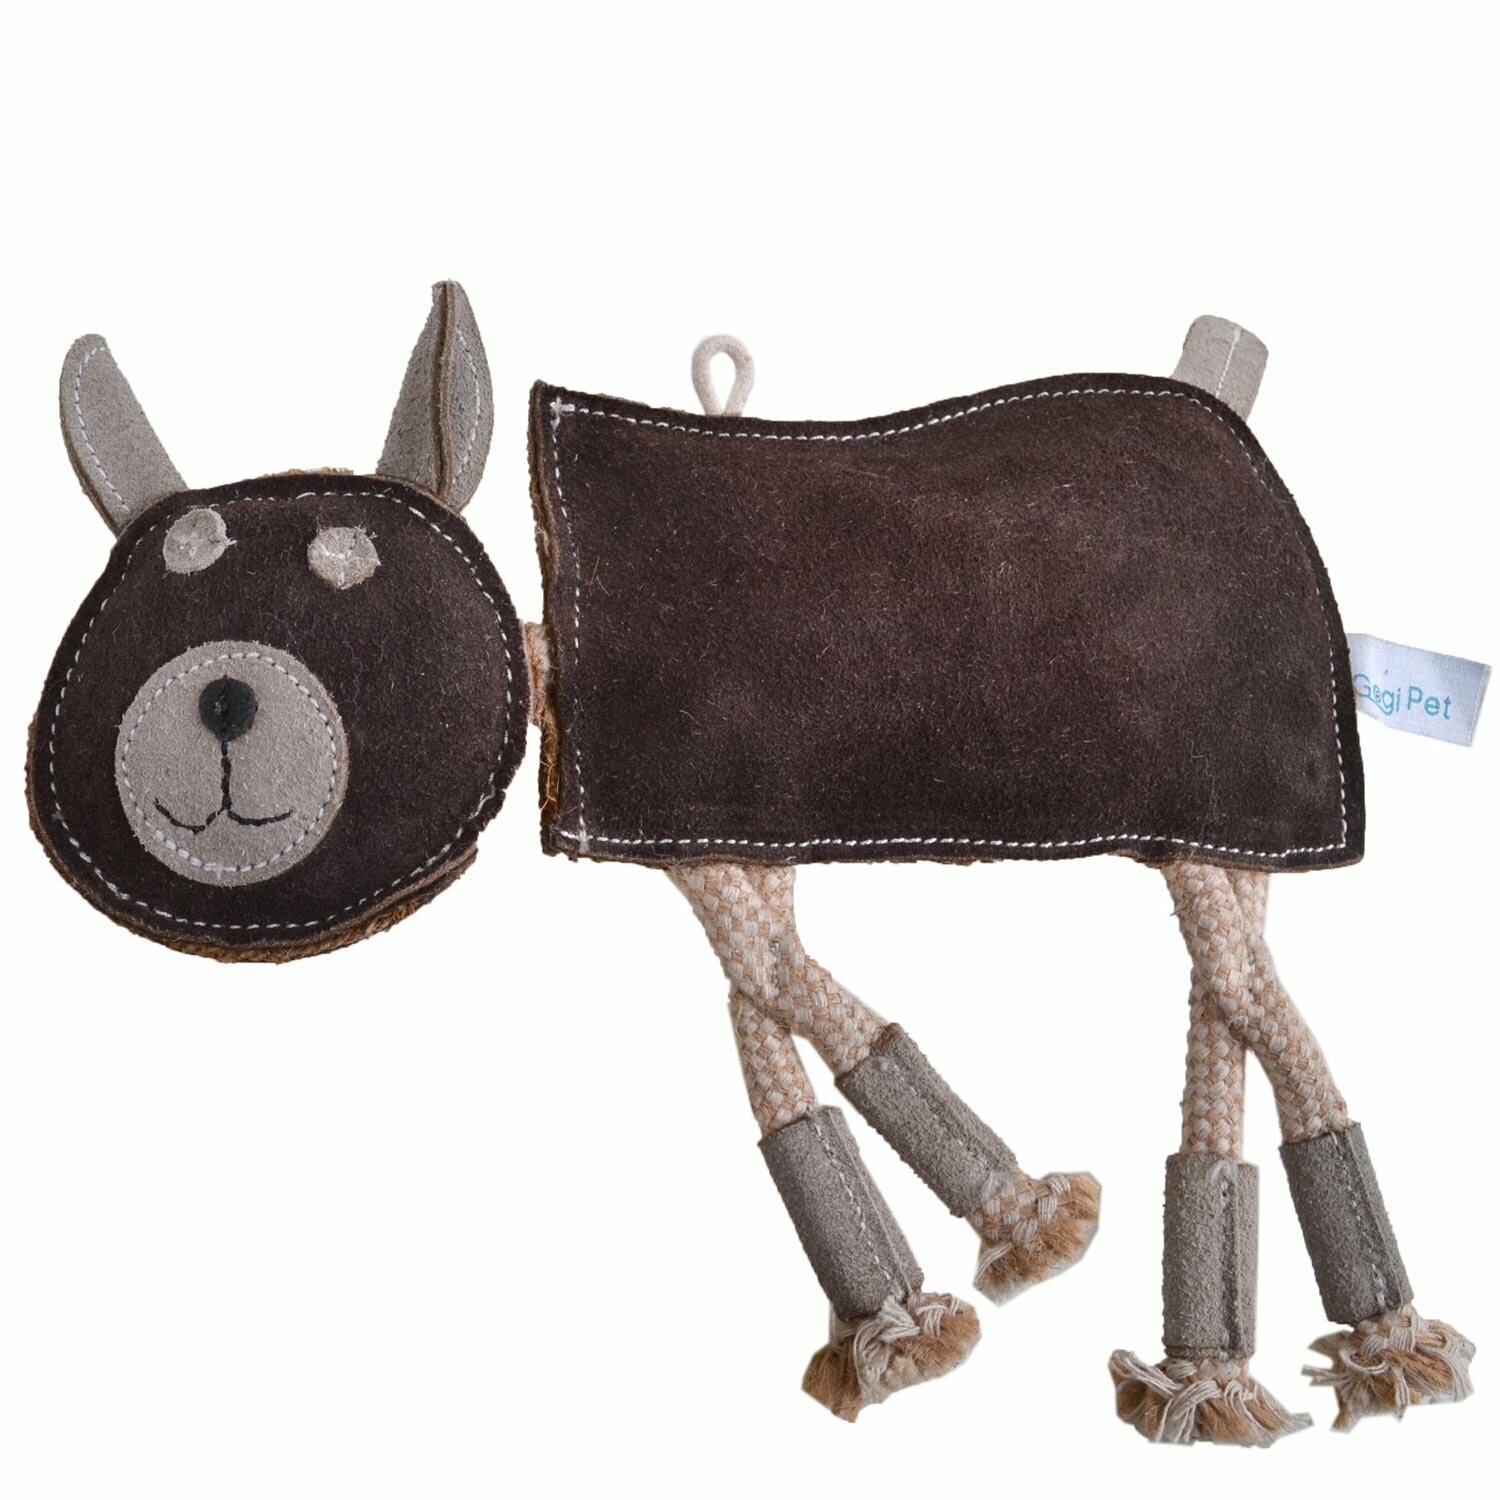 Dog toy made of leather GogiPet ® Naturetoy dog toy brown cow